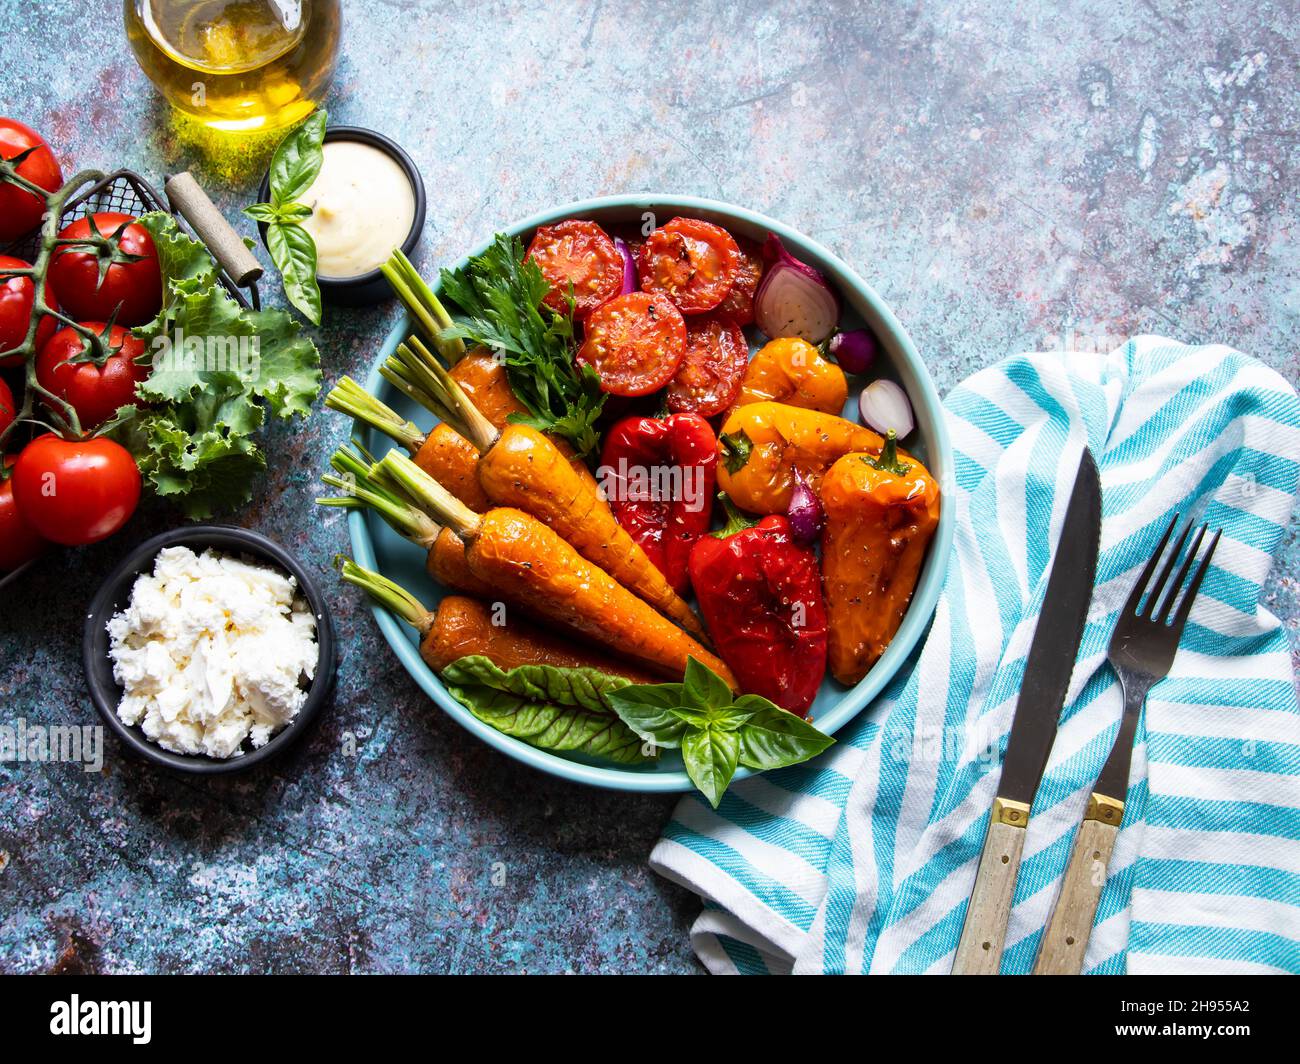 baked grill baby carrots, tomato, bell pepper in a plate, basil and spices vegan dish close up, white sauce Stock Photo